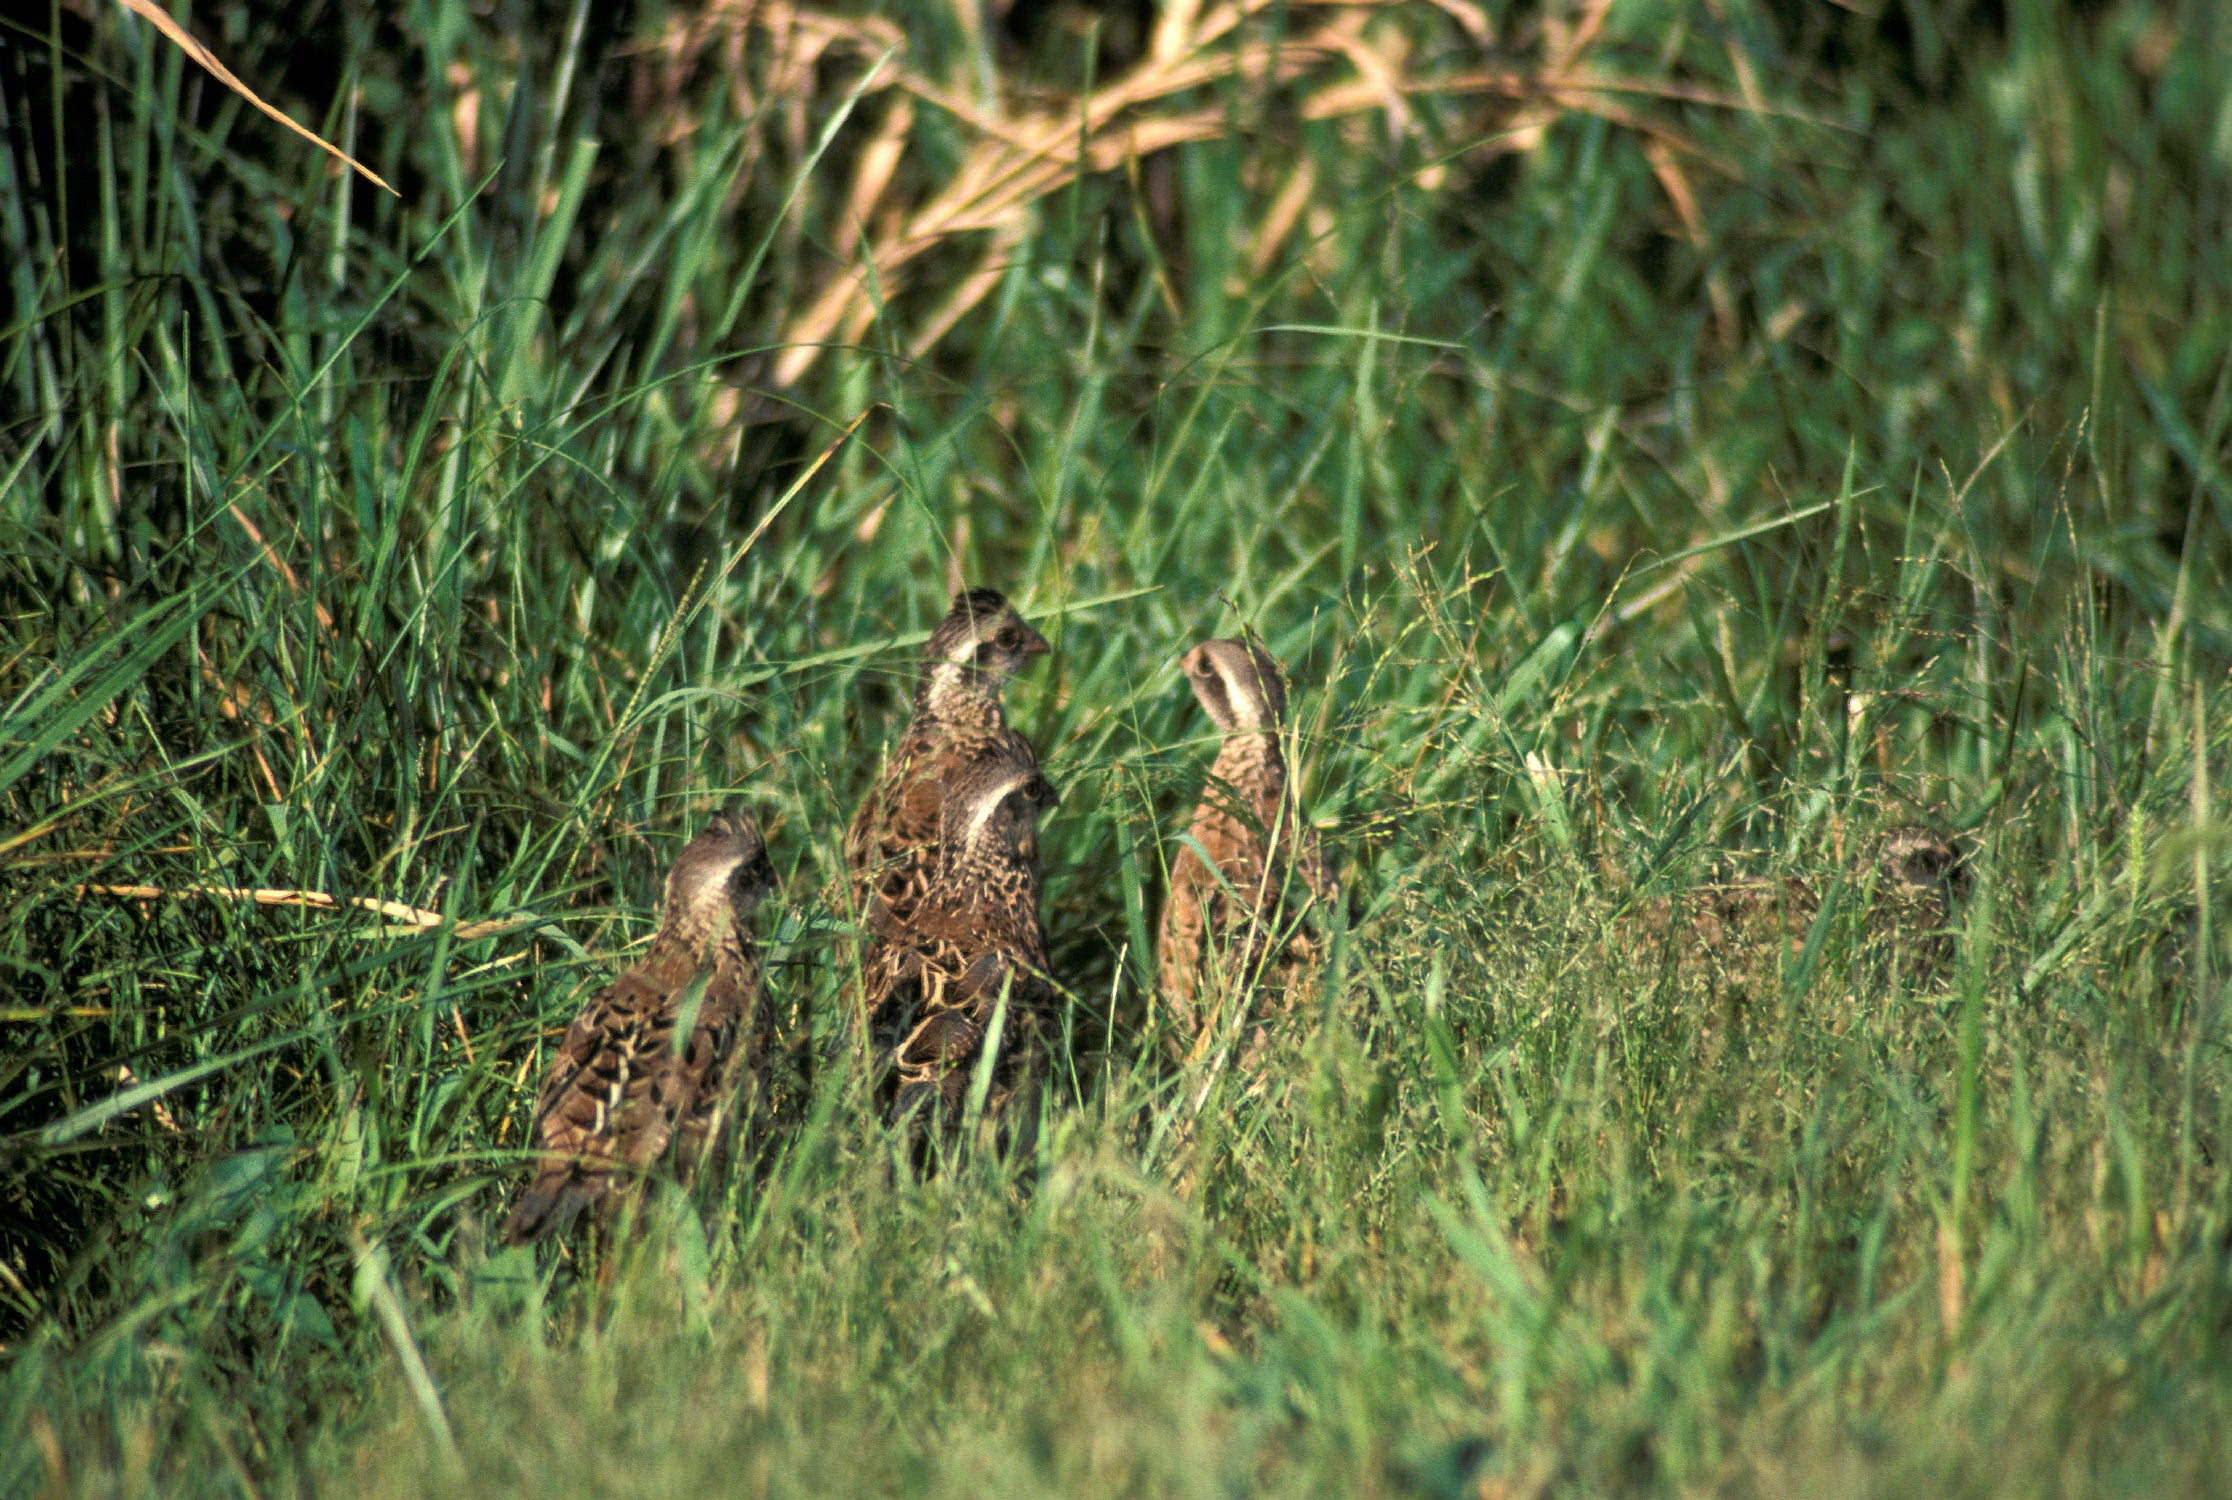 A young quail brood moves through cover.